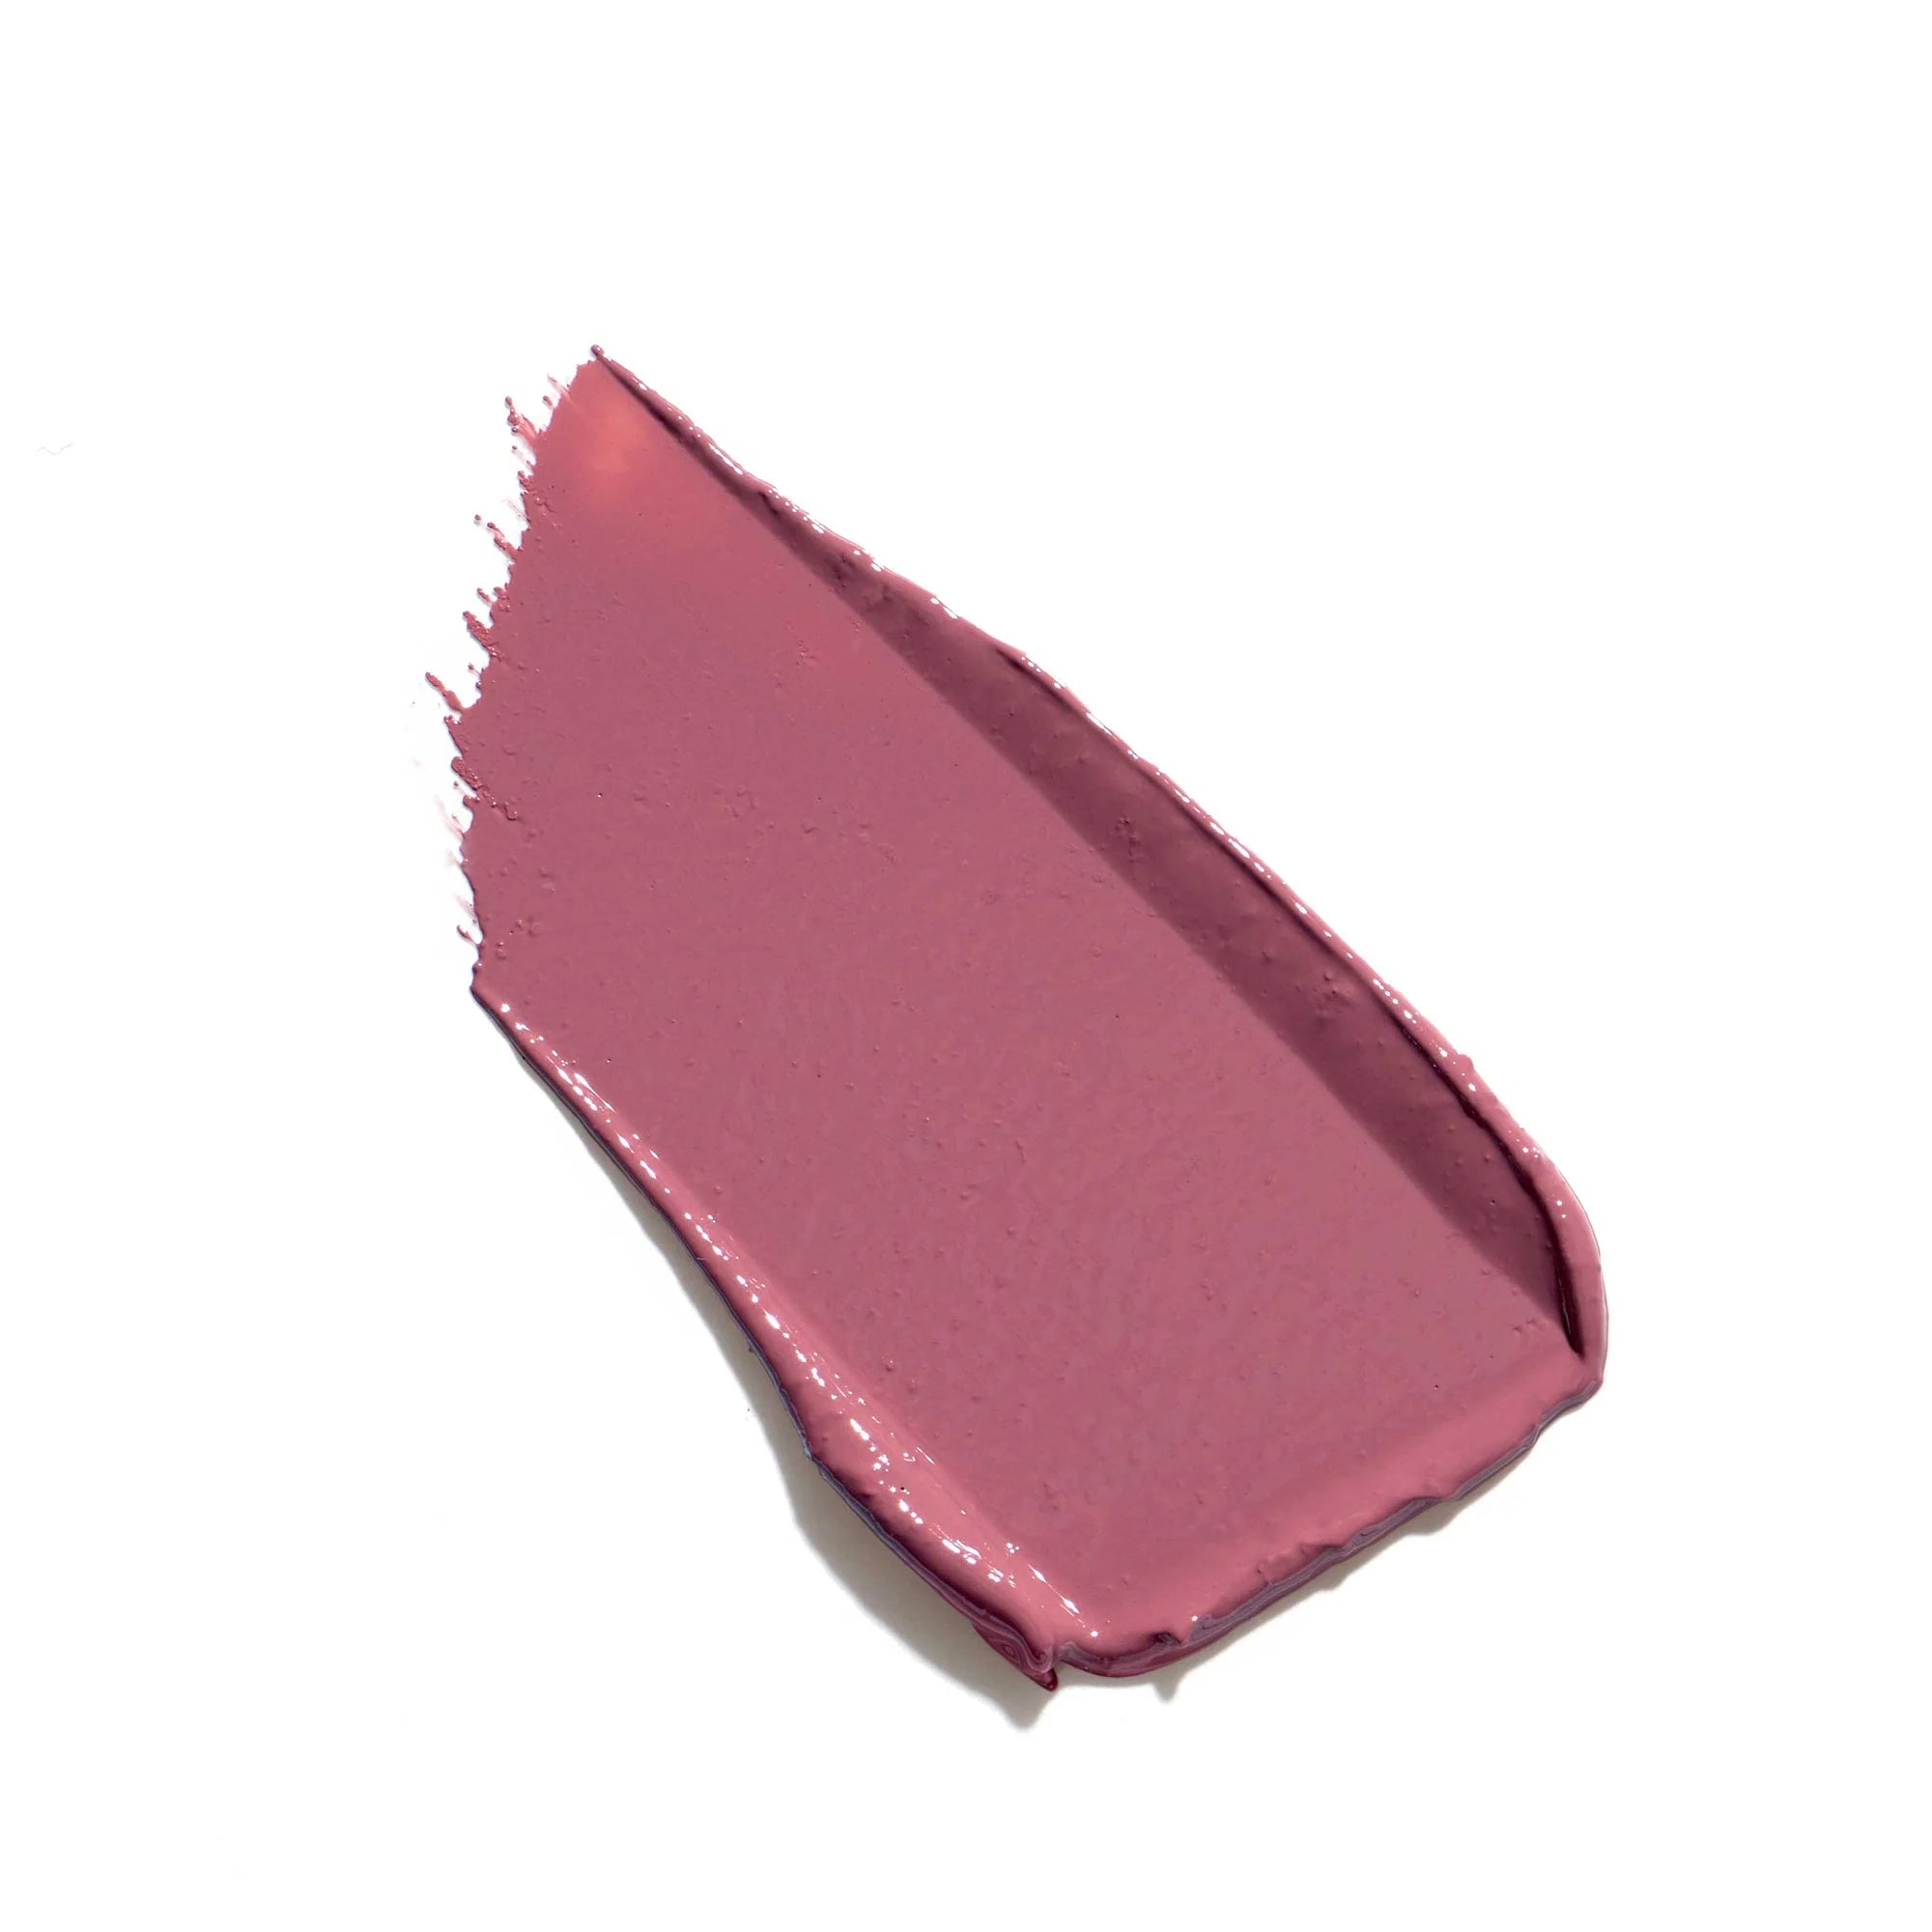 Jane Iredale's ColorLuxe Hydrating Cream Lipstick - swatch and color Mulberry - cool medium-dark pink